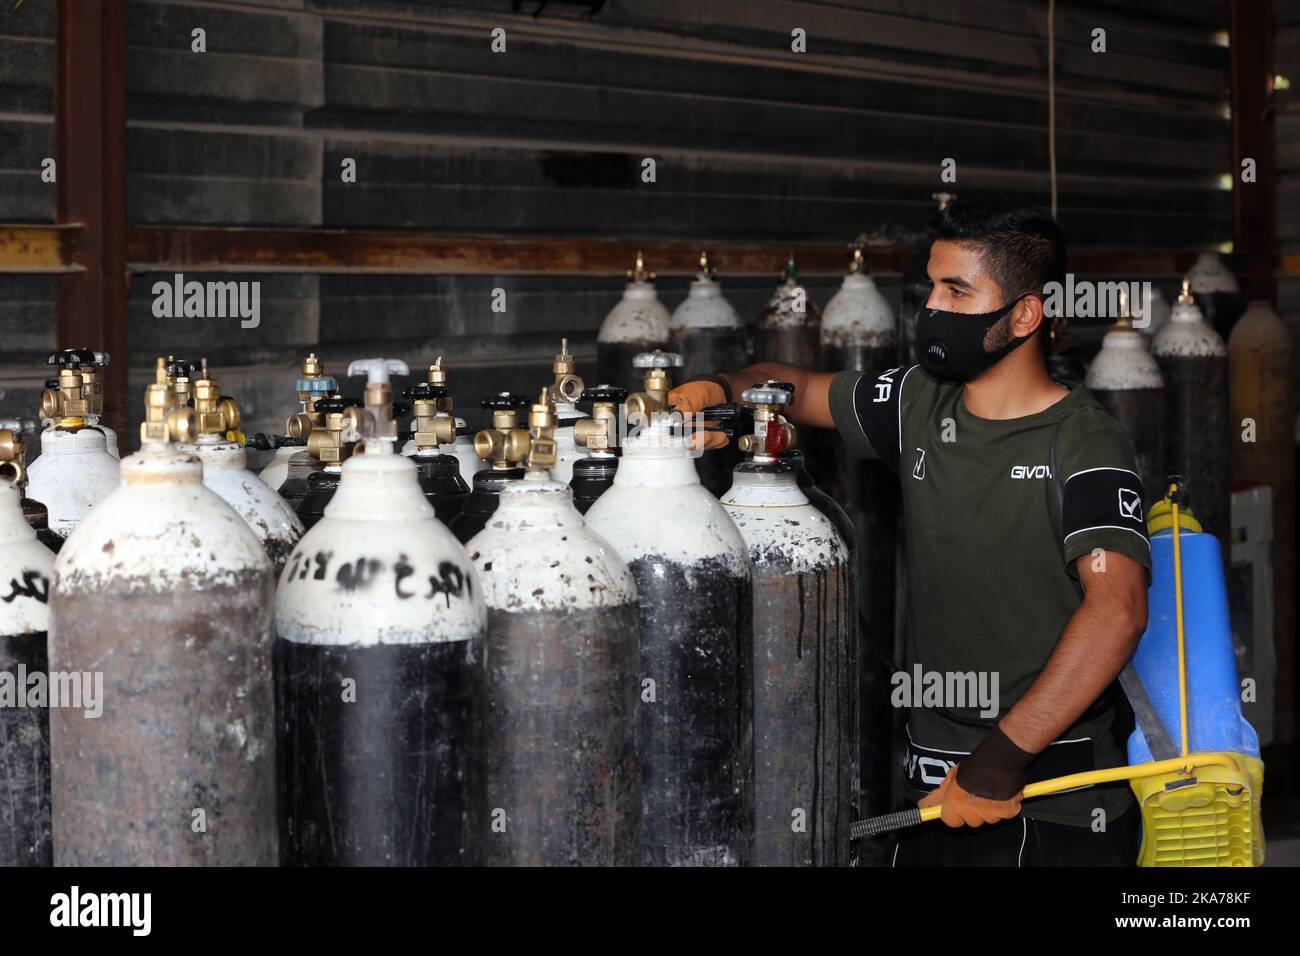 (200707) -- BAGHDAD, July 7, 2020 (Xinhua) -- A man works at an oxygen refilling station in Baghdad, Iraq, on July 7, 2020. A government-owned oxygen filling factory in Iraq has increased its filling of oxygen cylinders and the liquid gas to meet the demand of the Iraqi hospitals amid the continued rise in COVID-19 infections. The resurgence of COVID-19 pandemic continued in Iraq on Tuesday, as the Iraqi Health Ministry confirmed 2,426 new cases, bringing the total number of coronavirus infections nationwide to 64,701. (Xinhua) Stock Photo